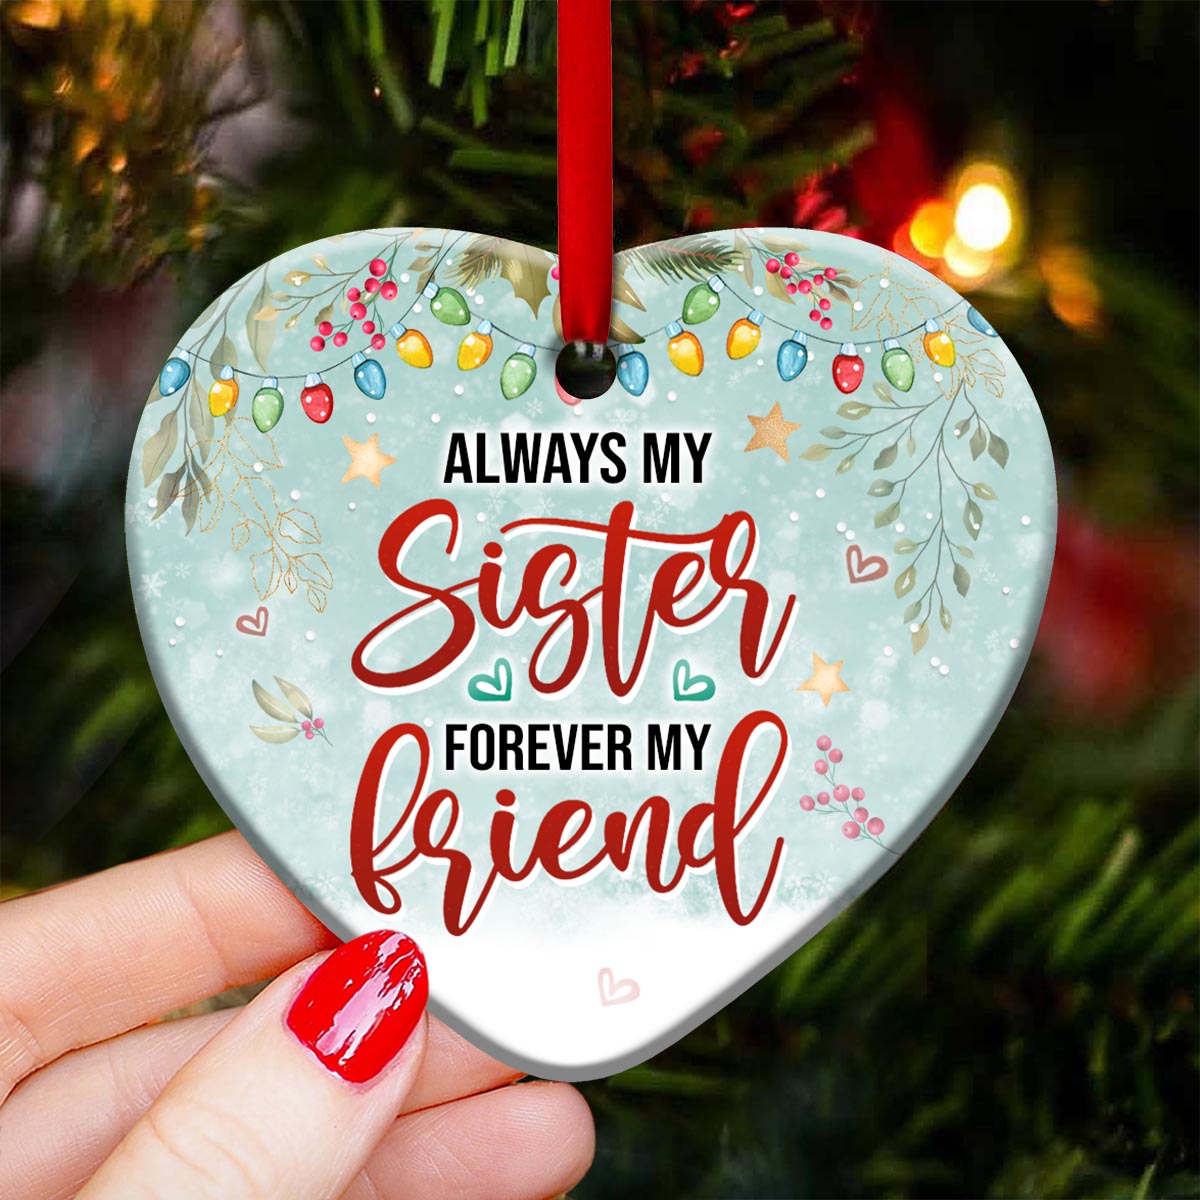 Sister Always My Sister Forever My Friend Heart Ceramic Ornament - Christmas Ornament - Christmas Gift